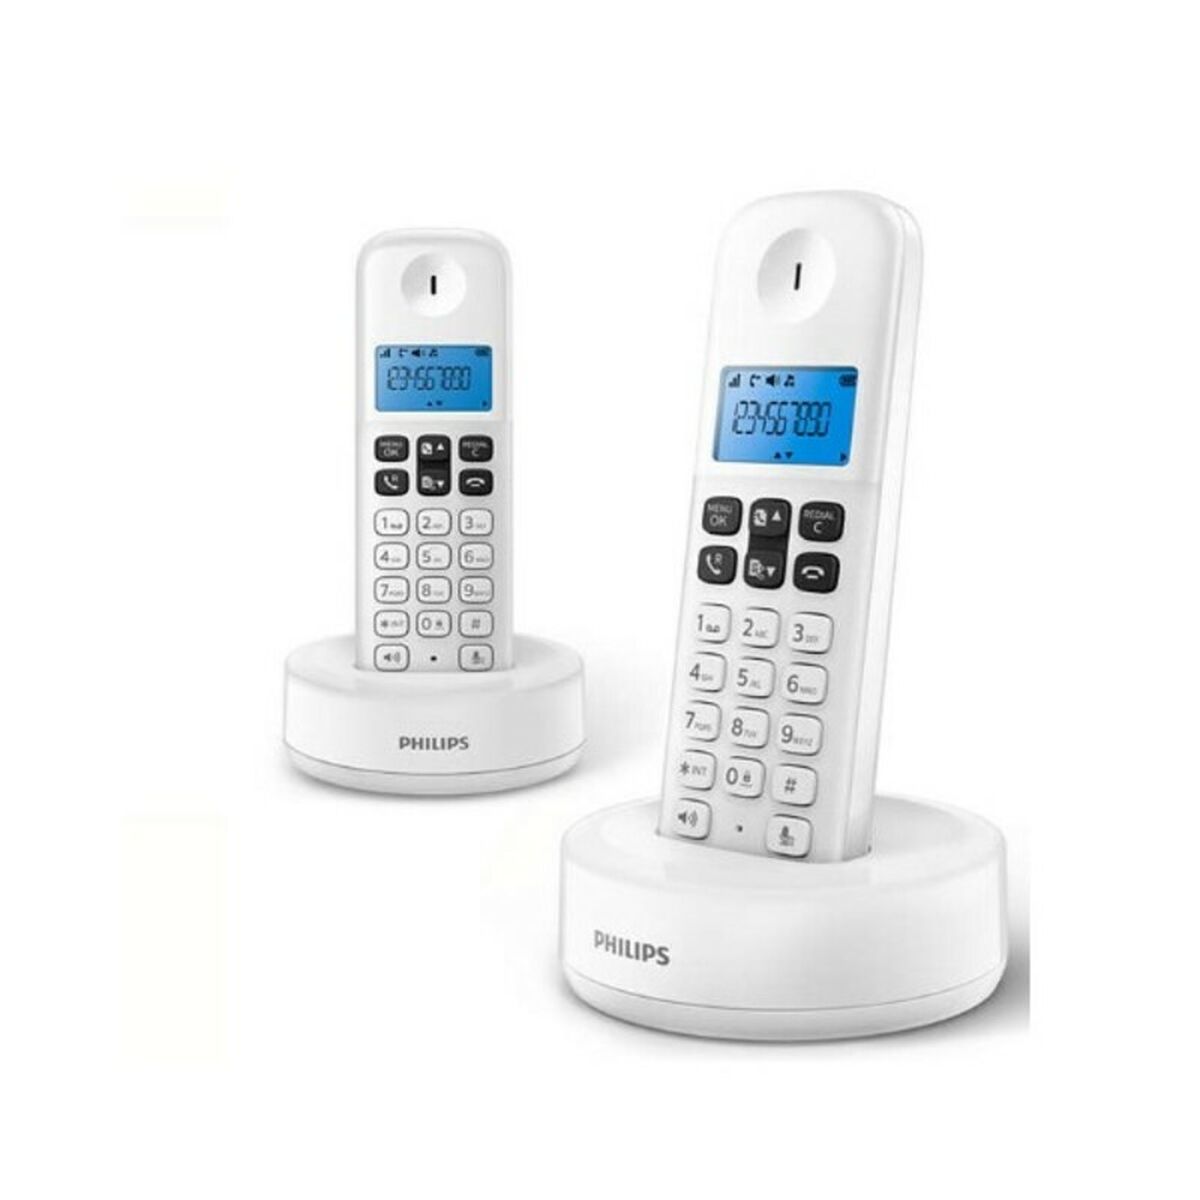 Wireless Phone Philips D1612W/34 1,6" 300 mAh GAP (2 pcs) White, Philips, Electronics, Landline telephones and accessories, wireless-phone-philips-d1612w-34-1-6-300-mah-gap-2-pcs-white, : Set of 2 Units, Brand_Philips, category-reference-2609, category-reference-2617, category-reference-2619, category-reference-t-18372, category-reference-t-19653, Condition_NEW, office, Price_50 - 100, telephones & tablets, Teleworking, RiotNook